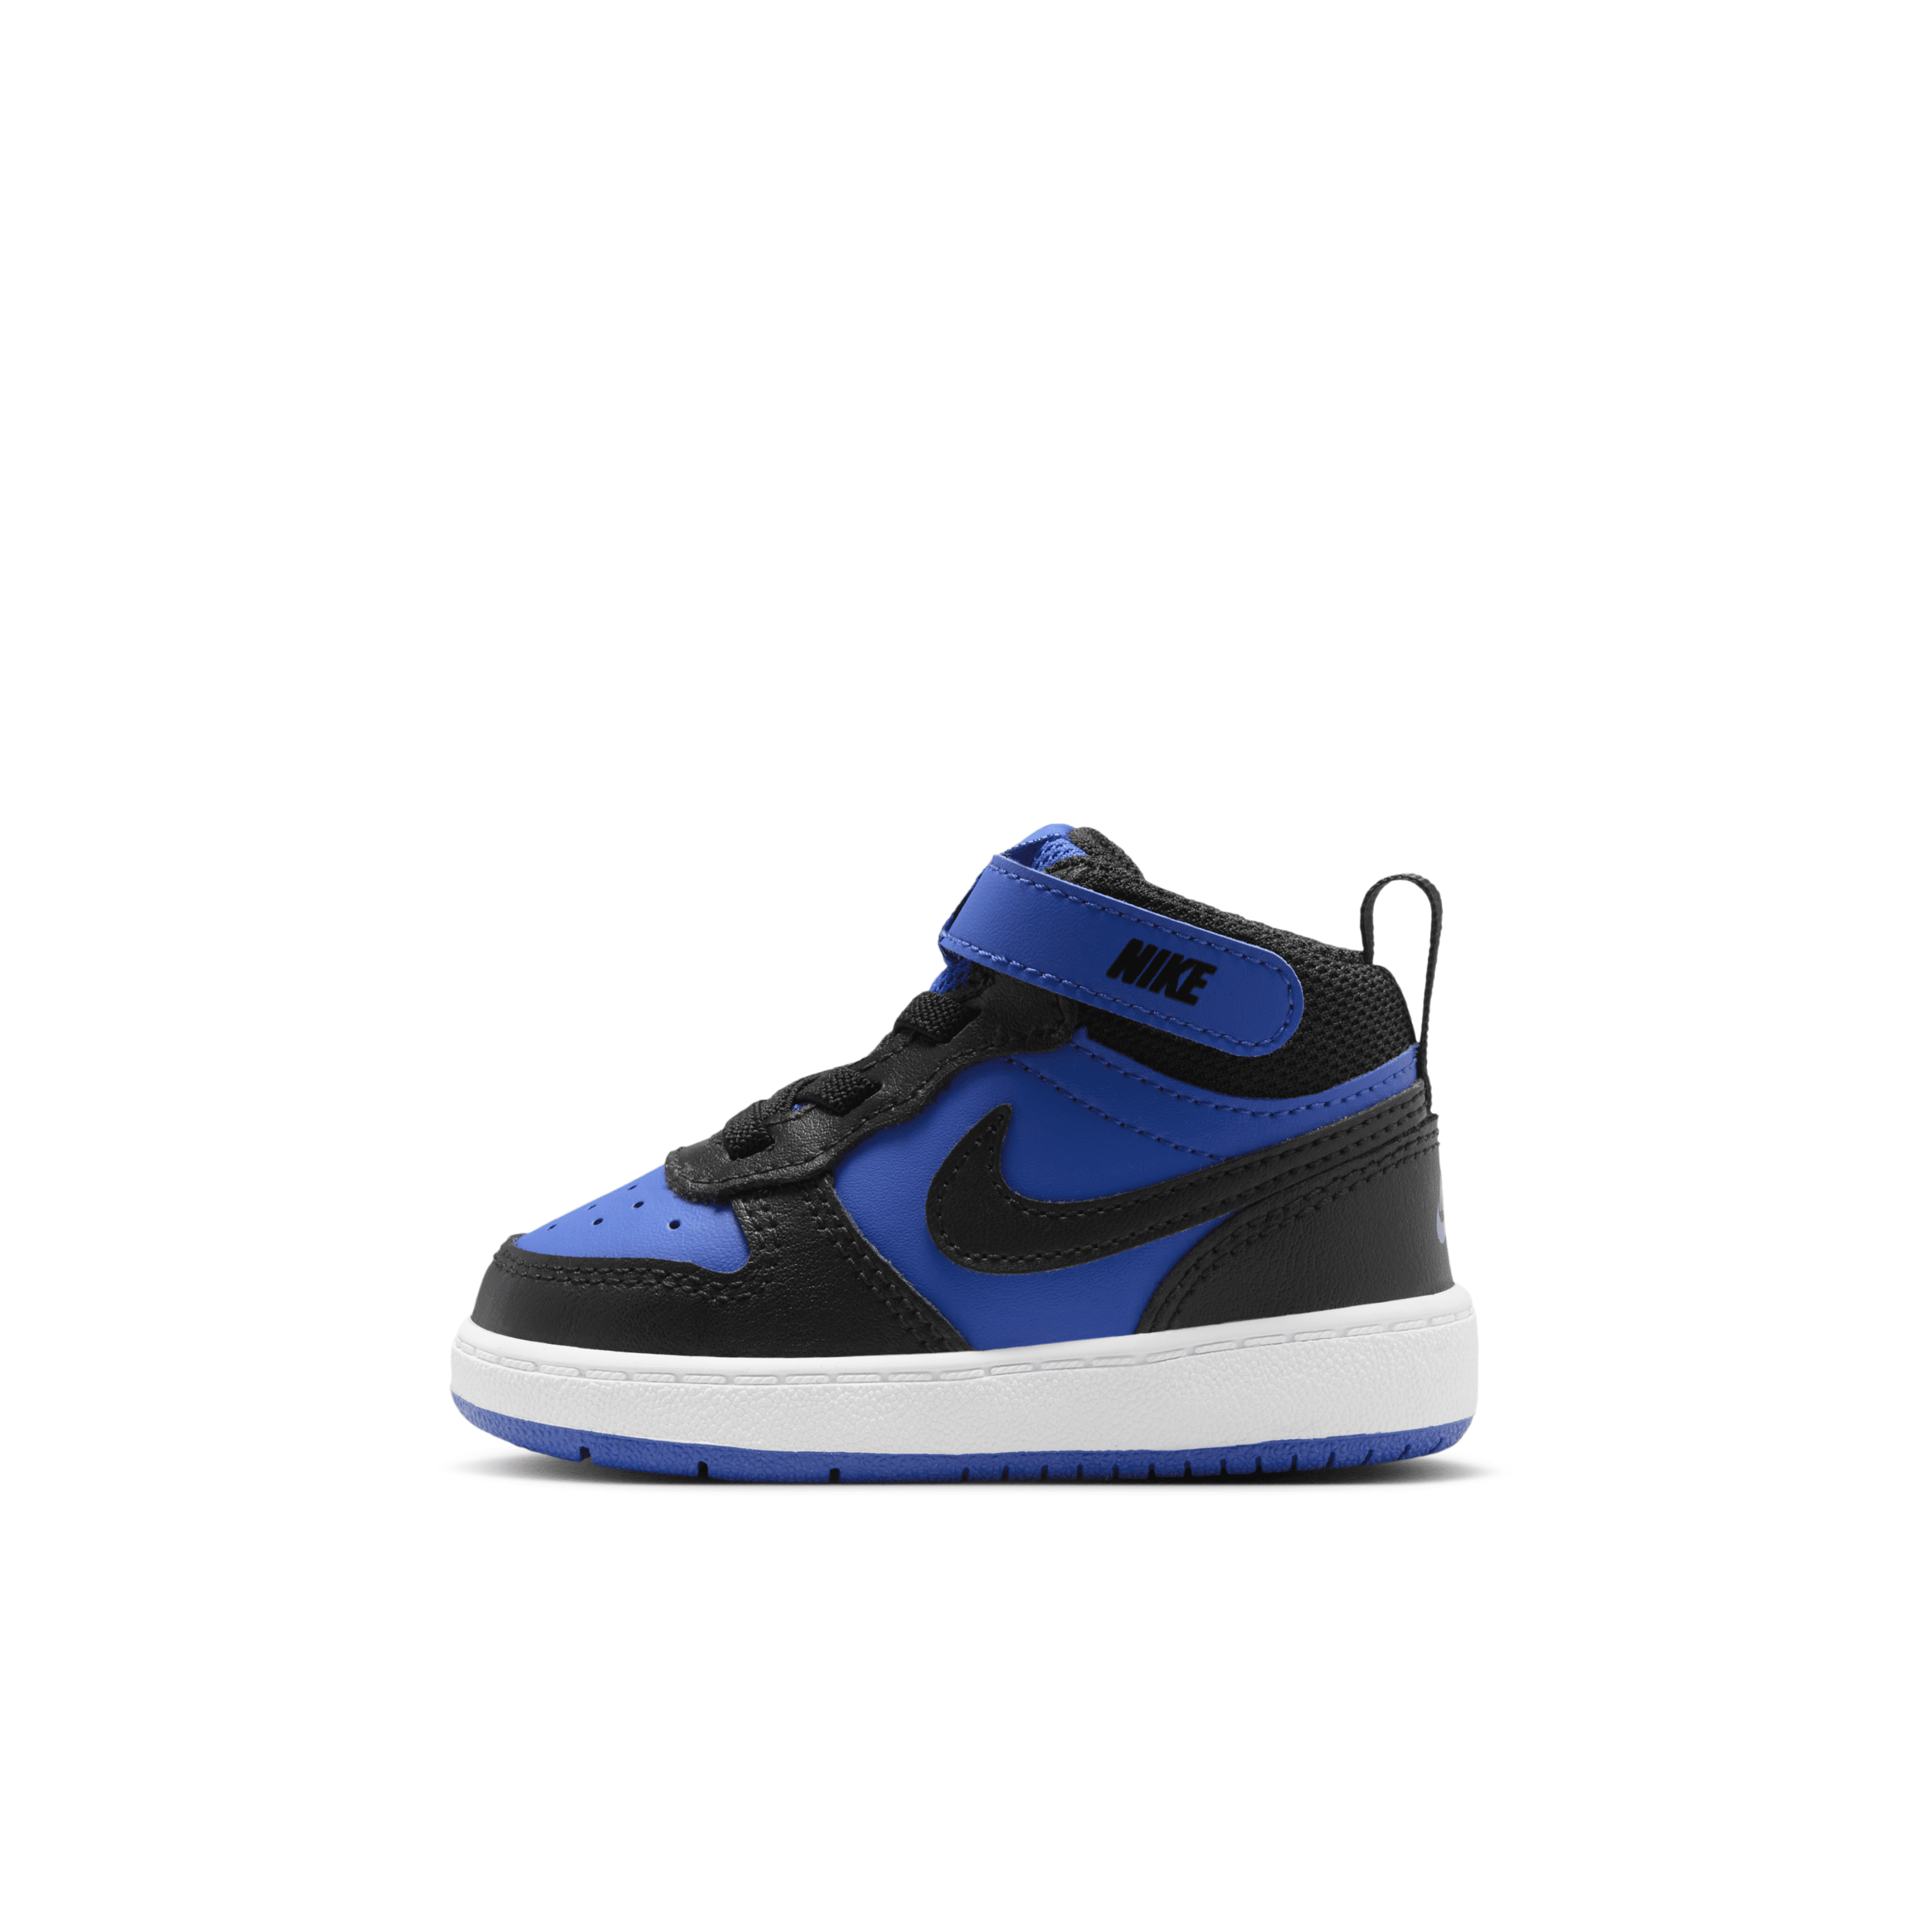 Nike Court Borough Mid 2 Baby/toddler Shoes In Blue